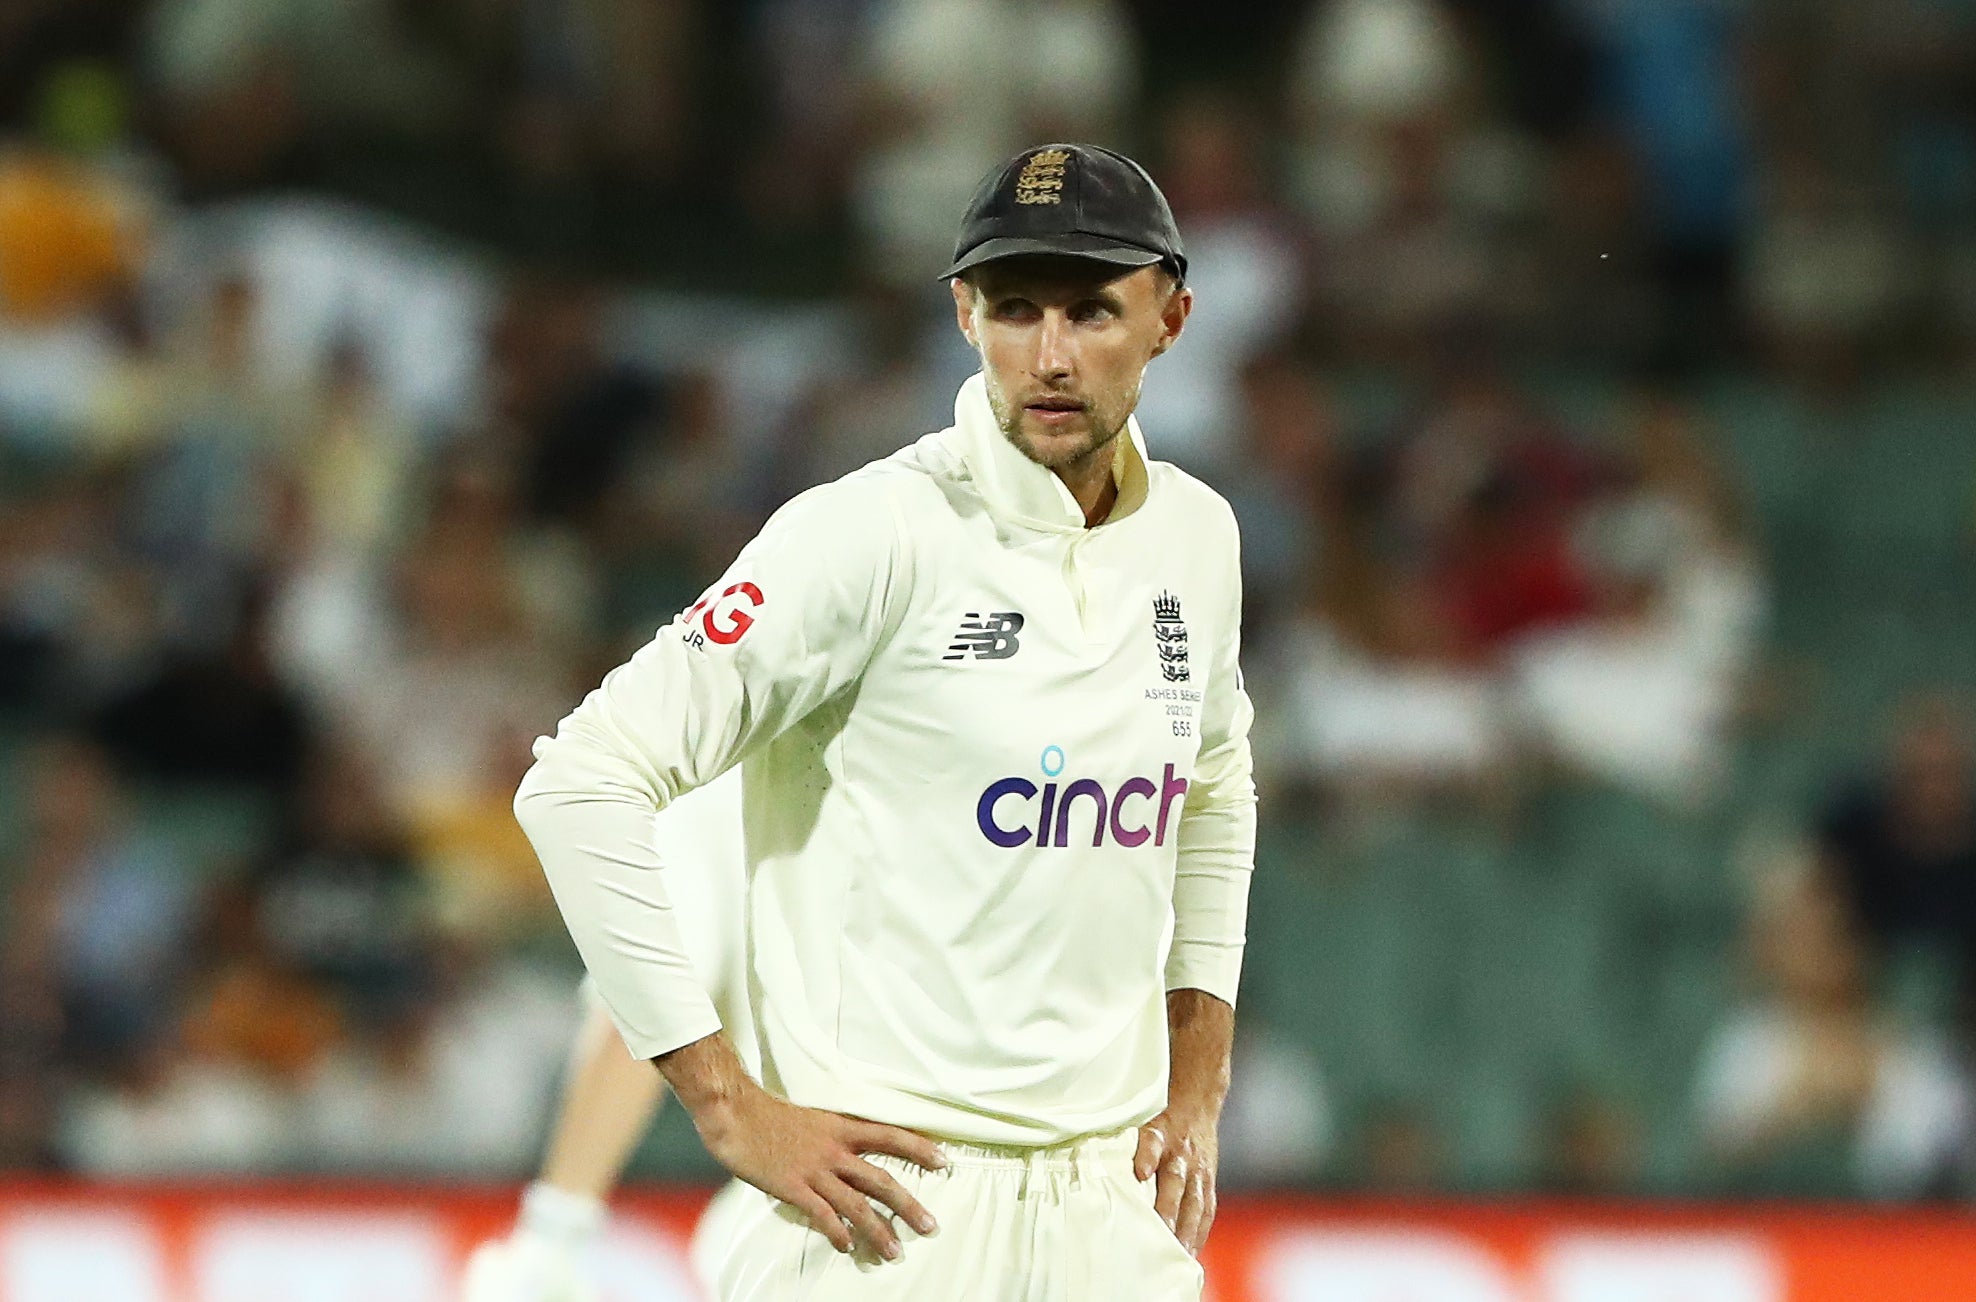 England captain Joe Root faces more questions over the direction of his side heading into the fourth day of the second Ashes Test in Adelaide (Jason O’Brien/PA)